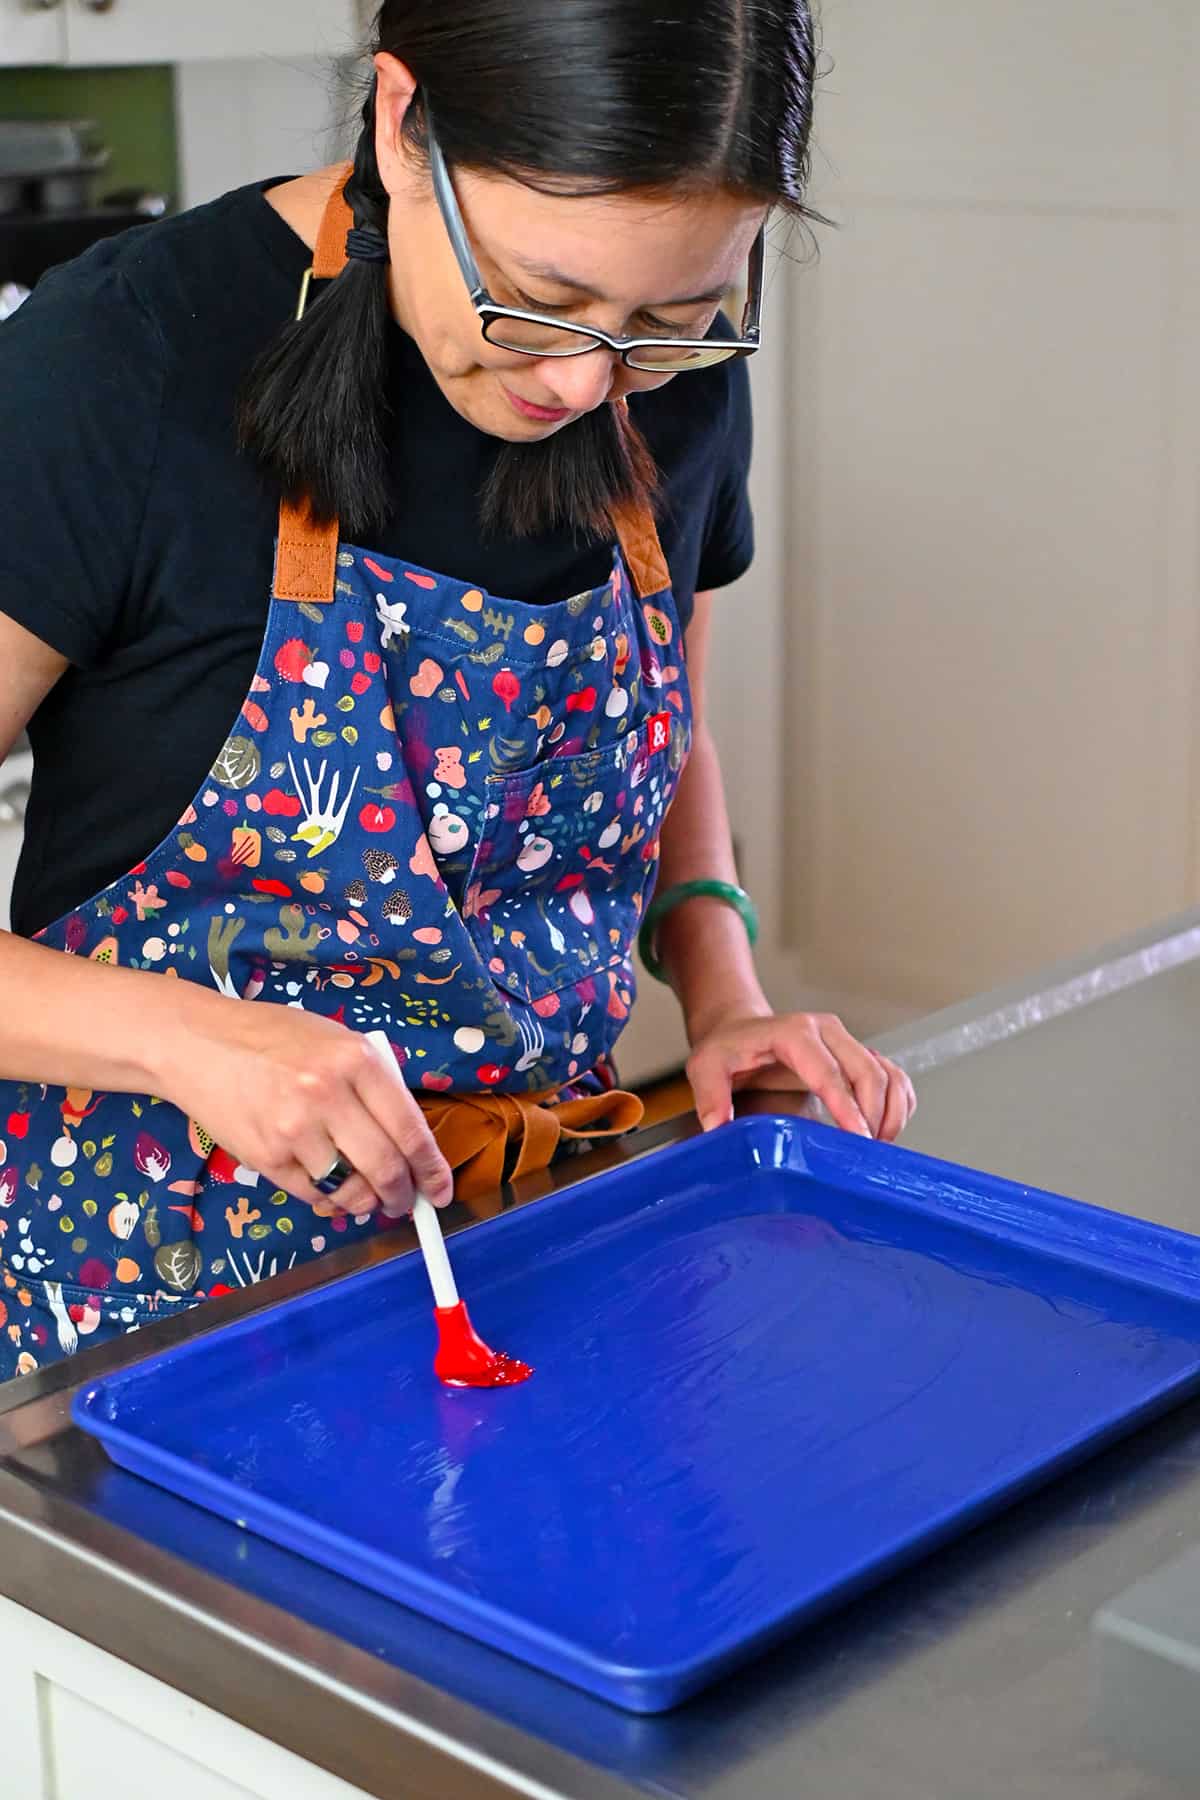 A smiling Asian woman is brushing oil on a blue rimmed baking sheet to make sheet pan eggs.